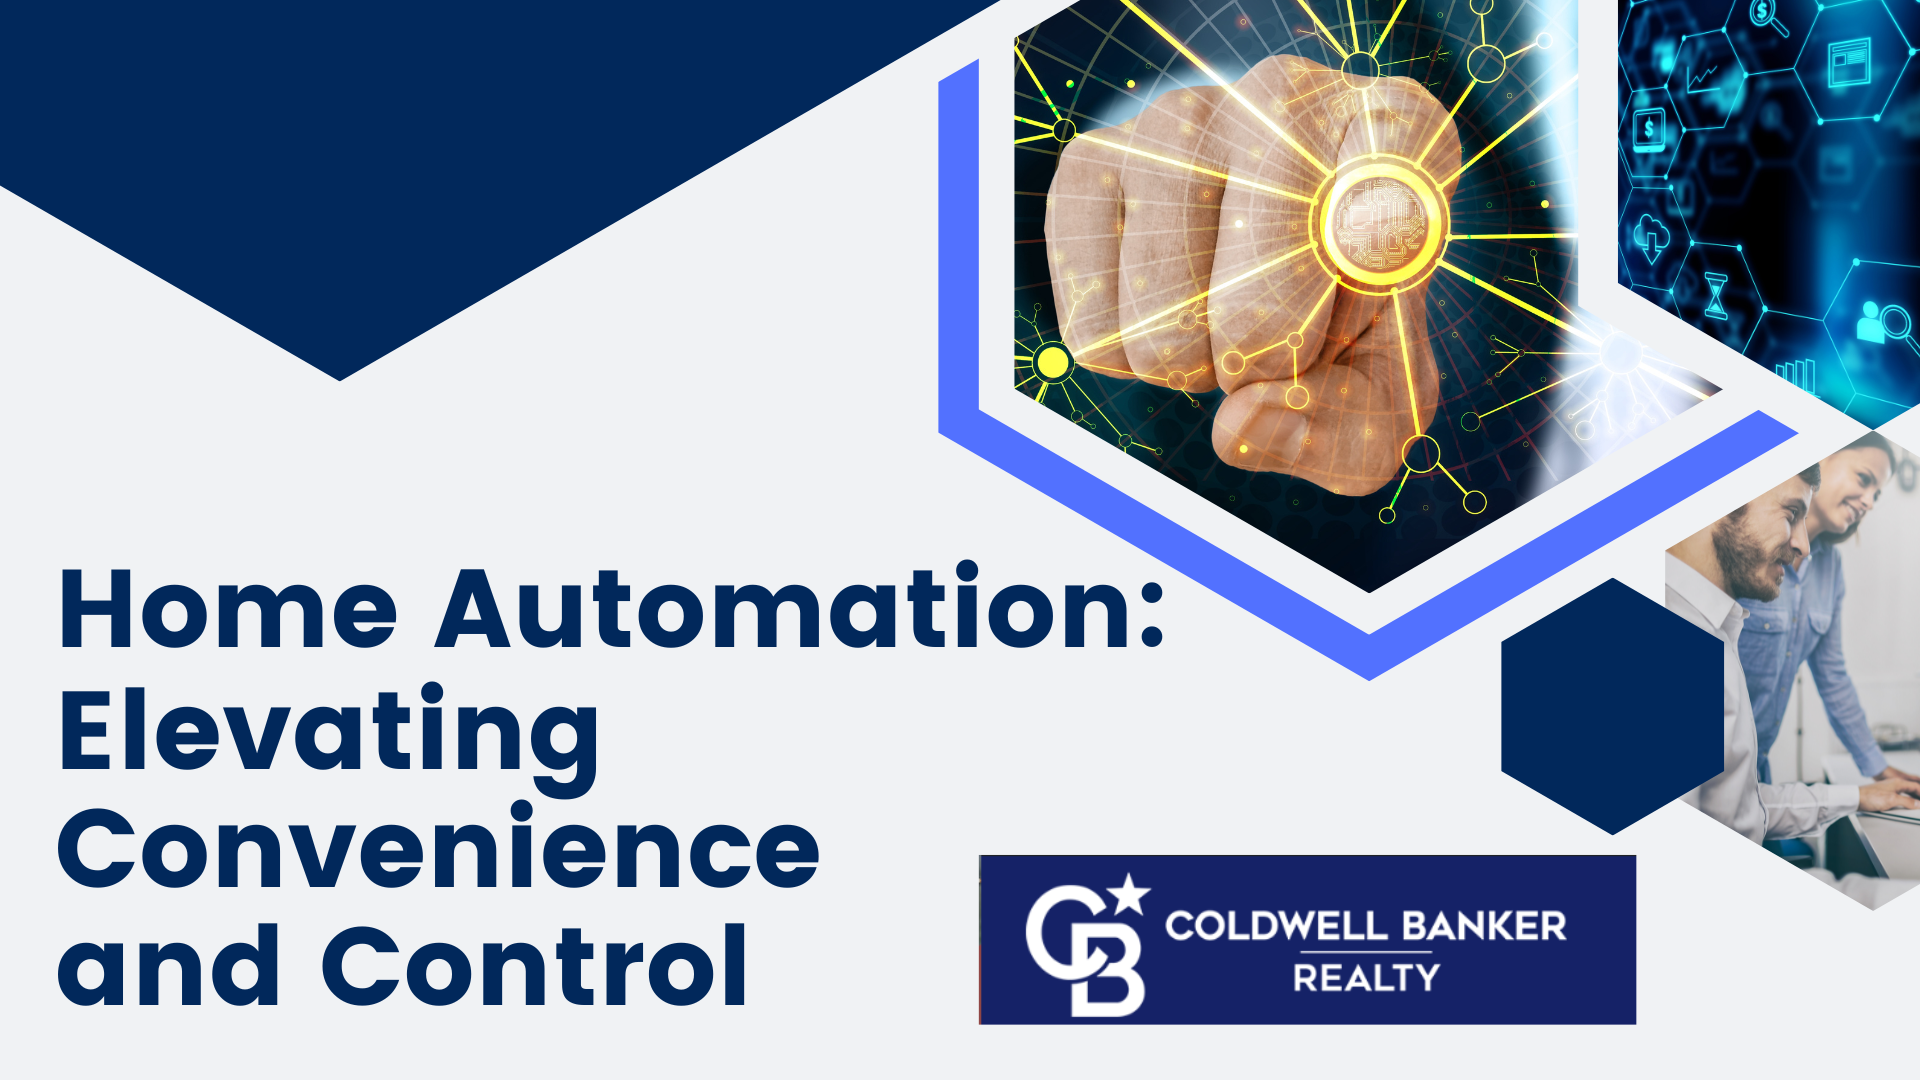 Home Automation: Elevating Convenience and Control